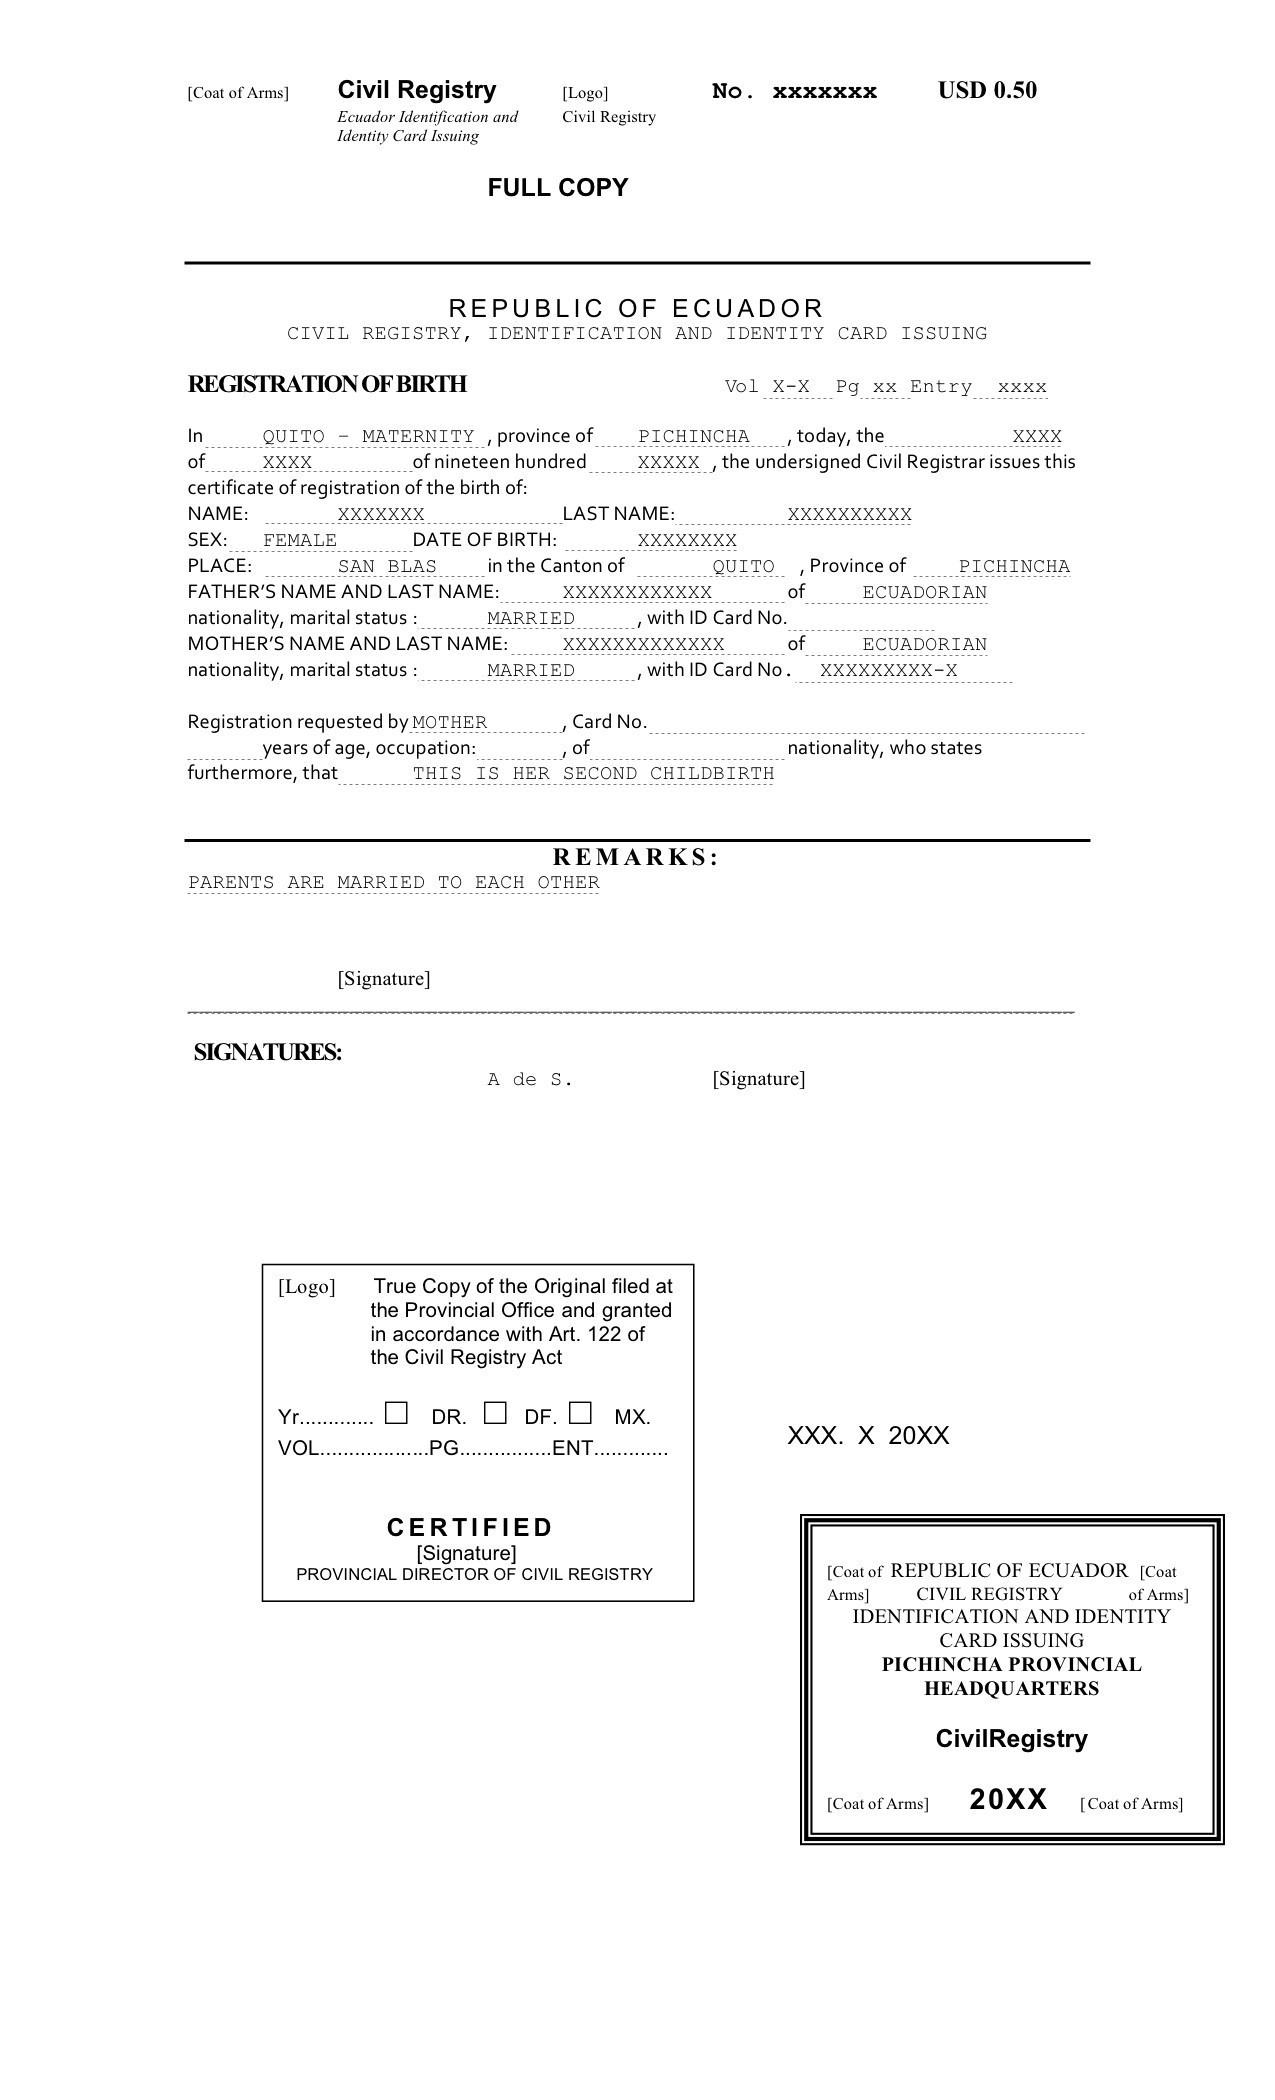 Death Certificate Translation From Spanish To English Sample Within Birth Certificate Translation Template English To Spanish